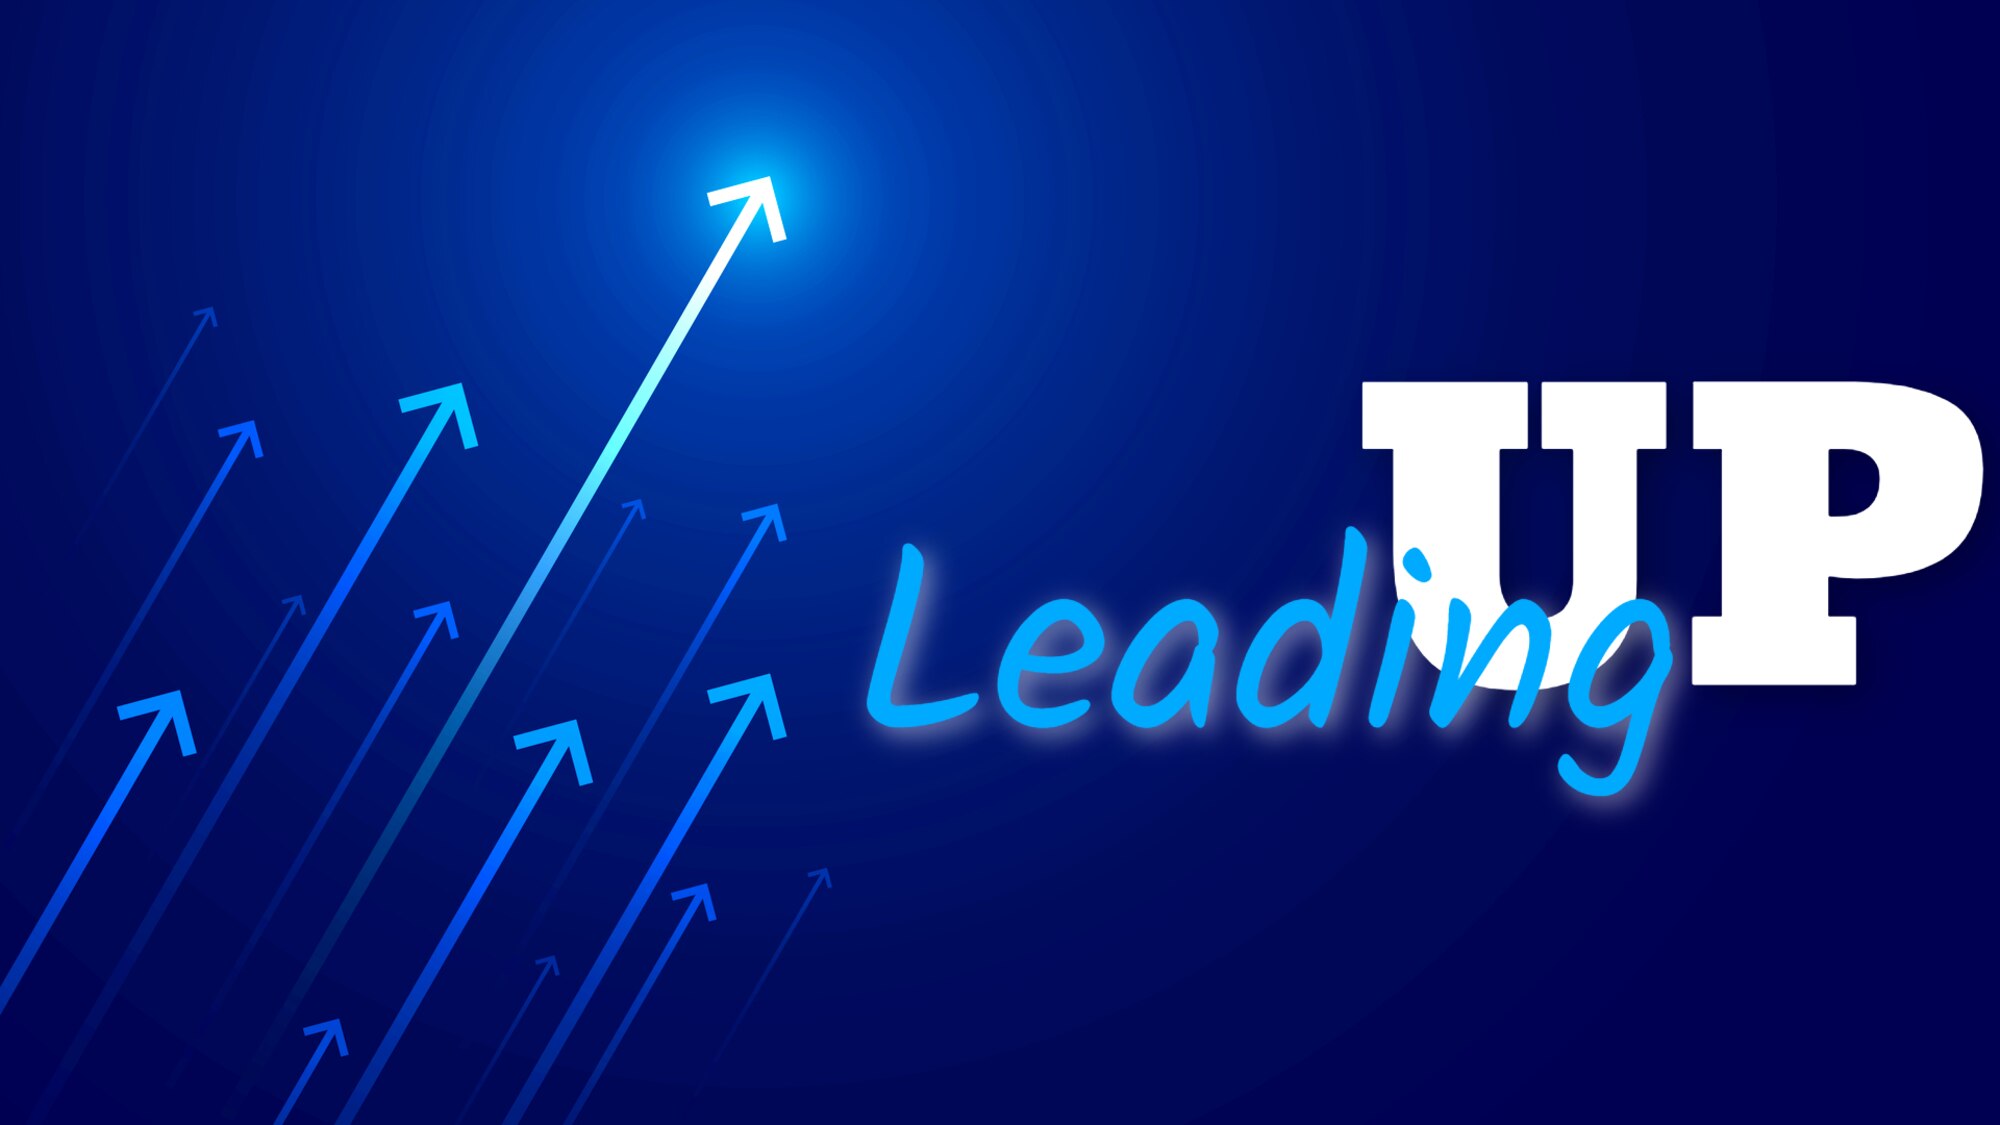 Graphic shows arrows pointing up with the text, "Leading up."